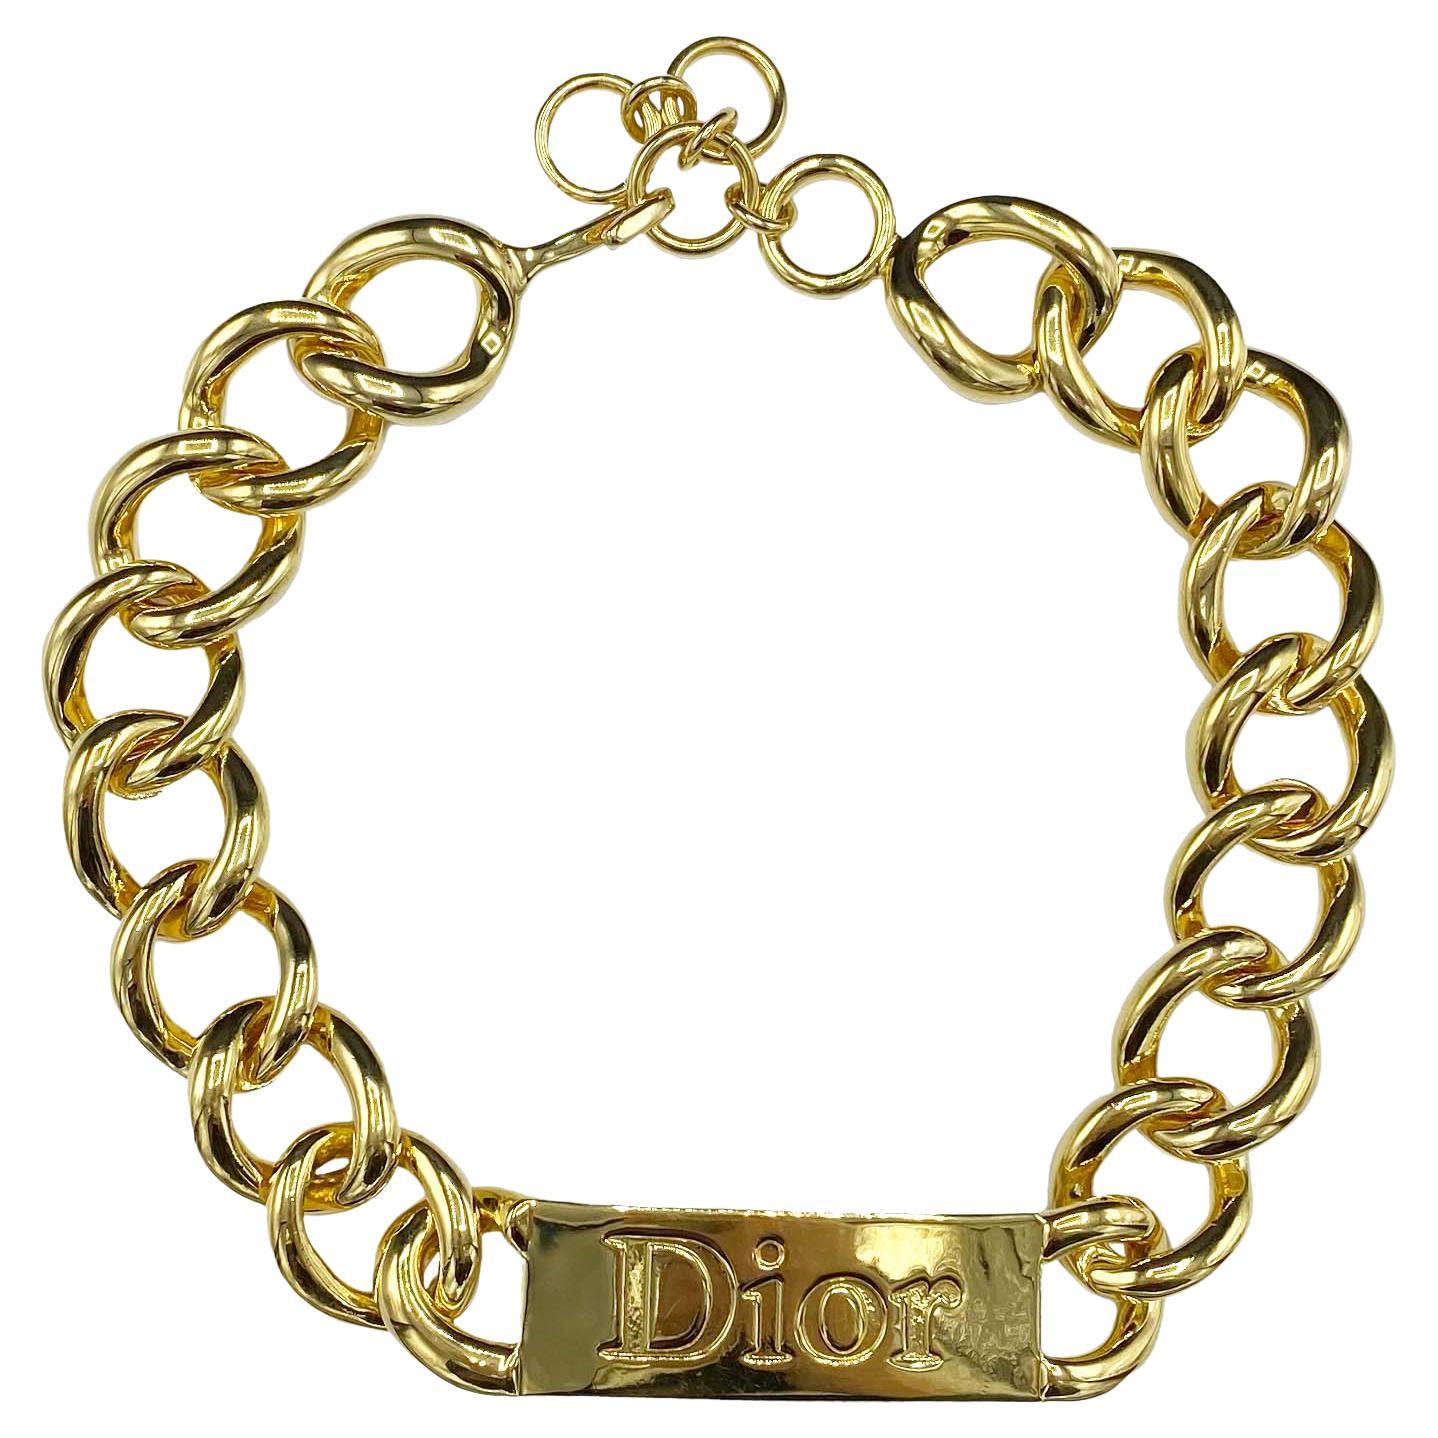 F/W 2000 Christian Dior by John Galliano Oversized Logo ID Choker Necklace For Sale